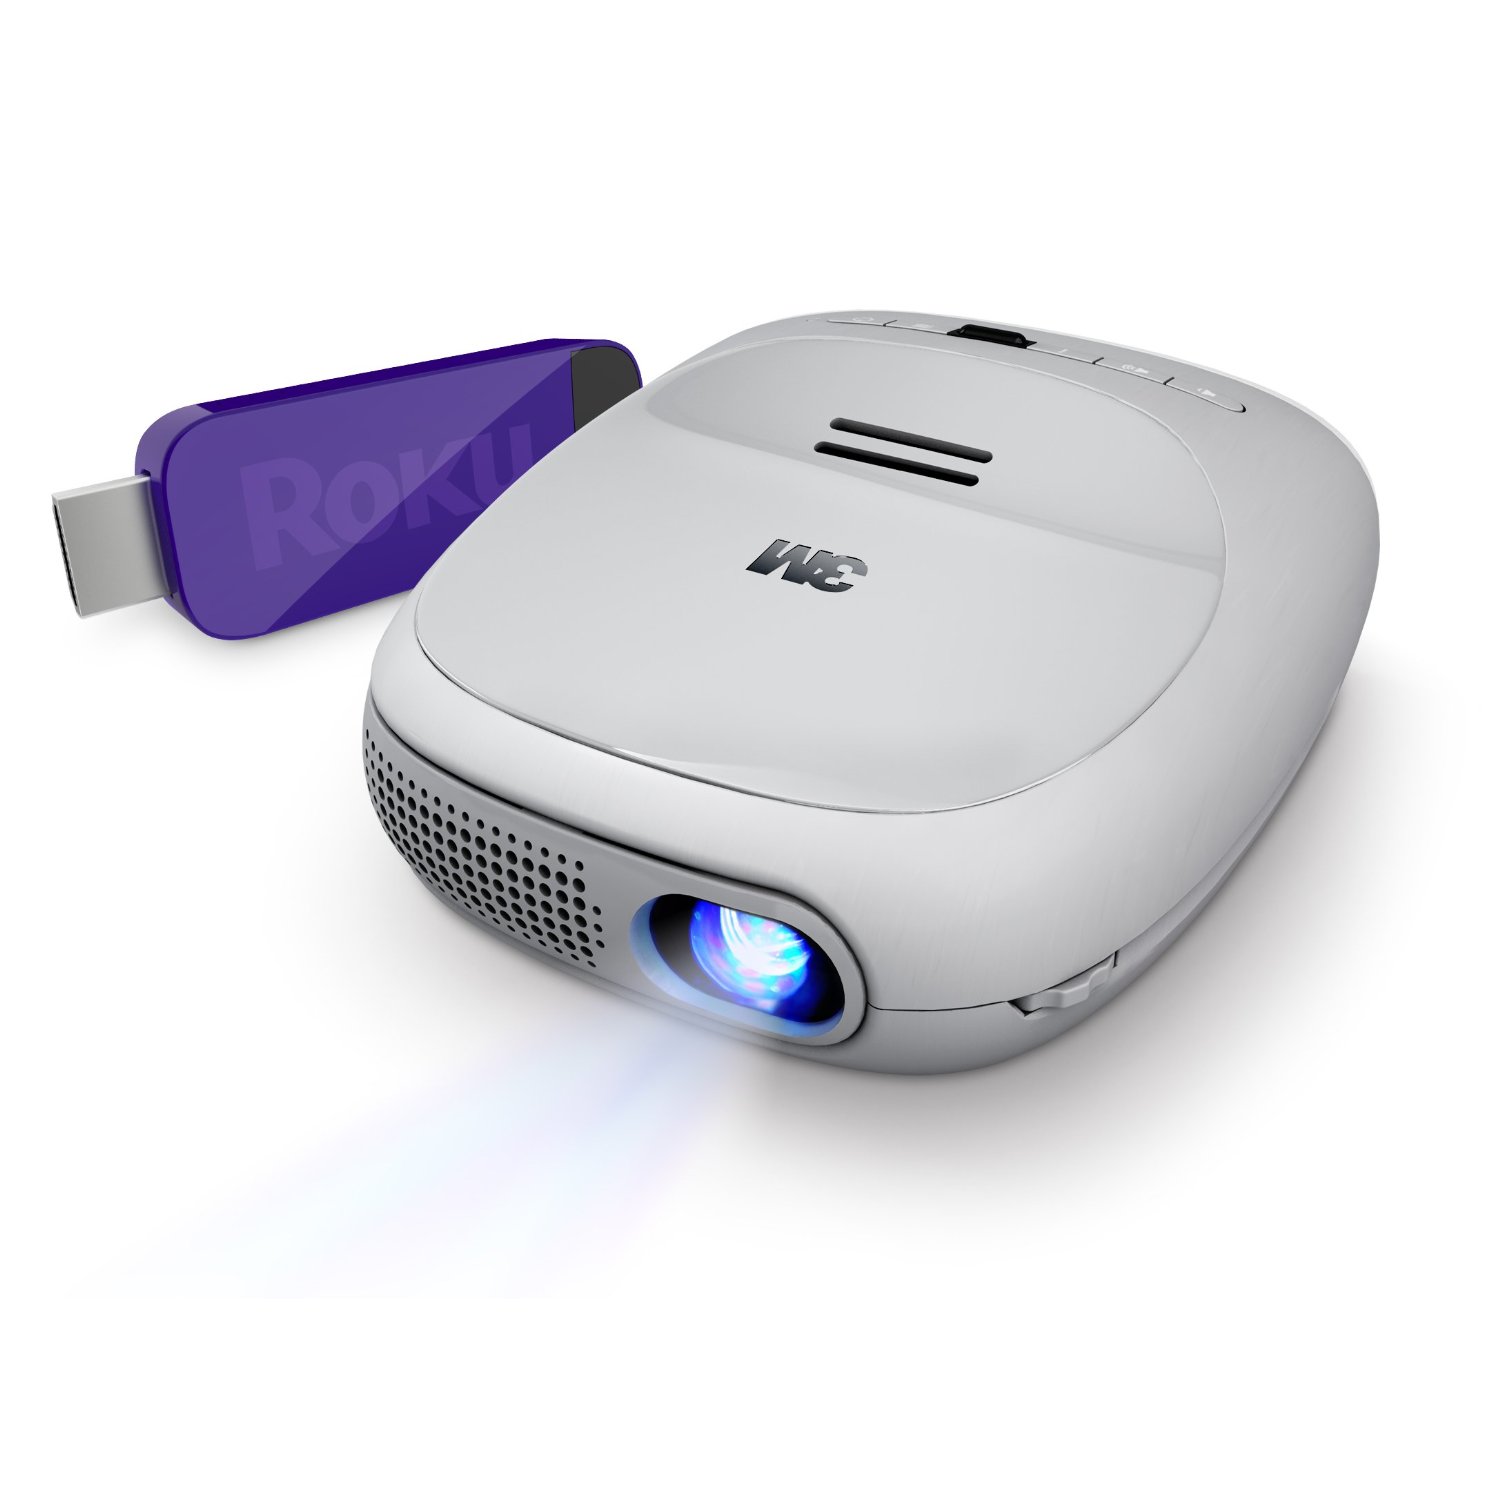 http://thetechjournal.com/wp-content/uploads/images/1210/1349596953-amazon-is-taking-preorder-for-3m-streaming-projector-by-roku-for-300-1.jpg